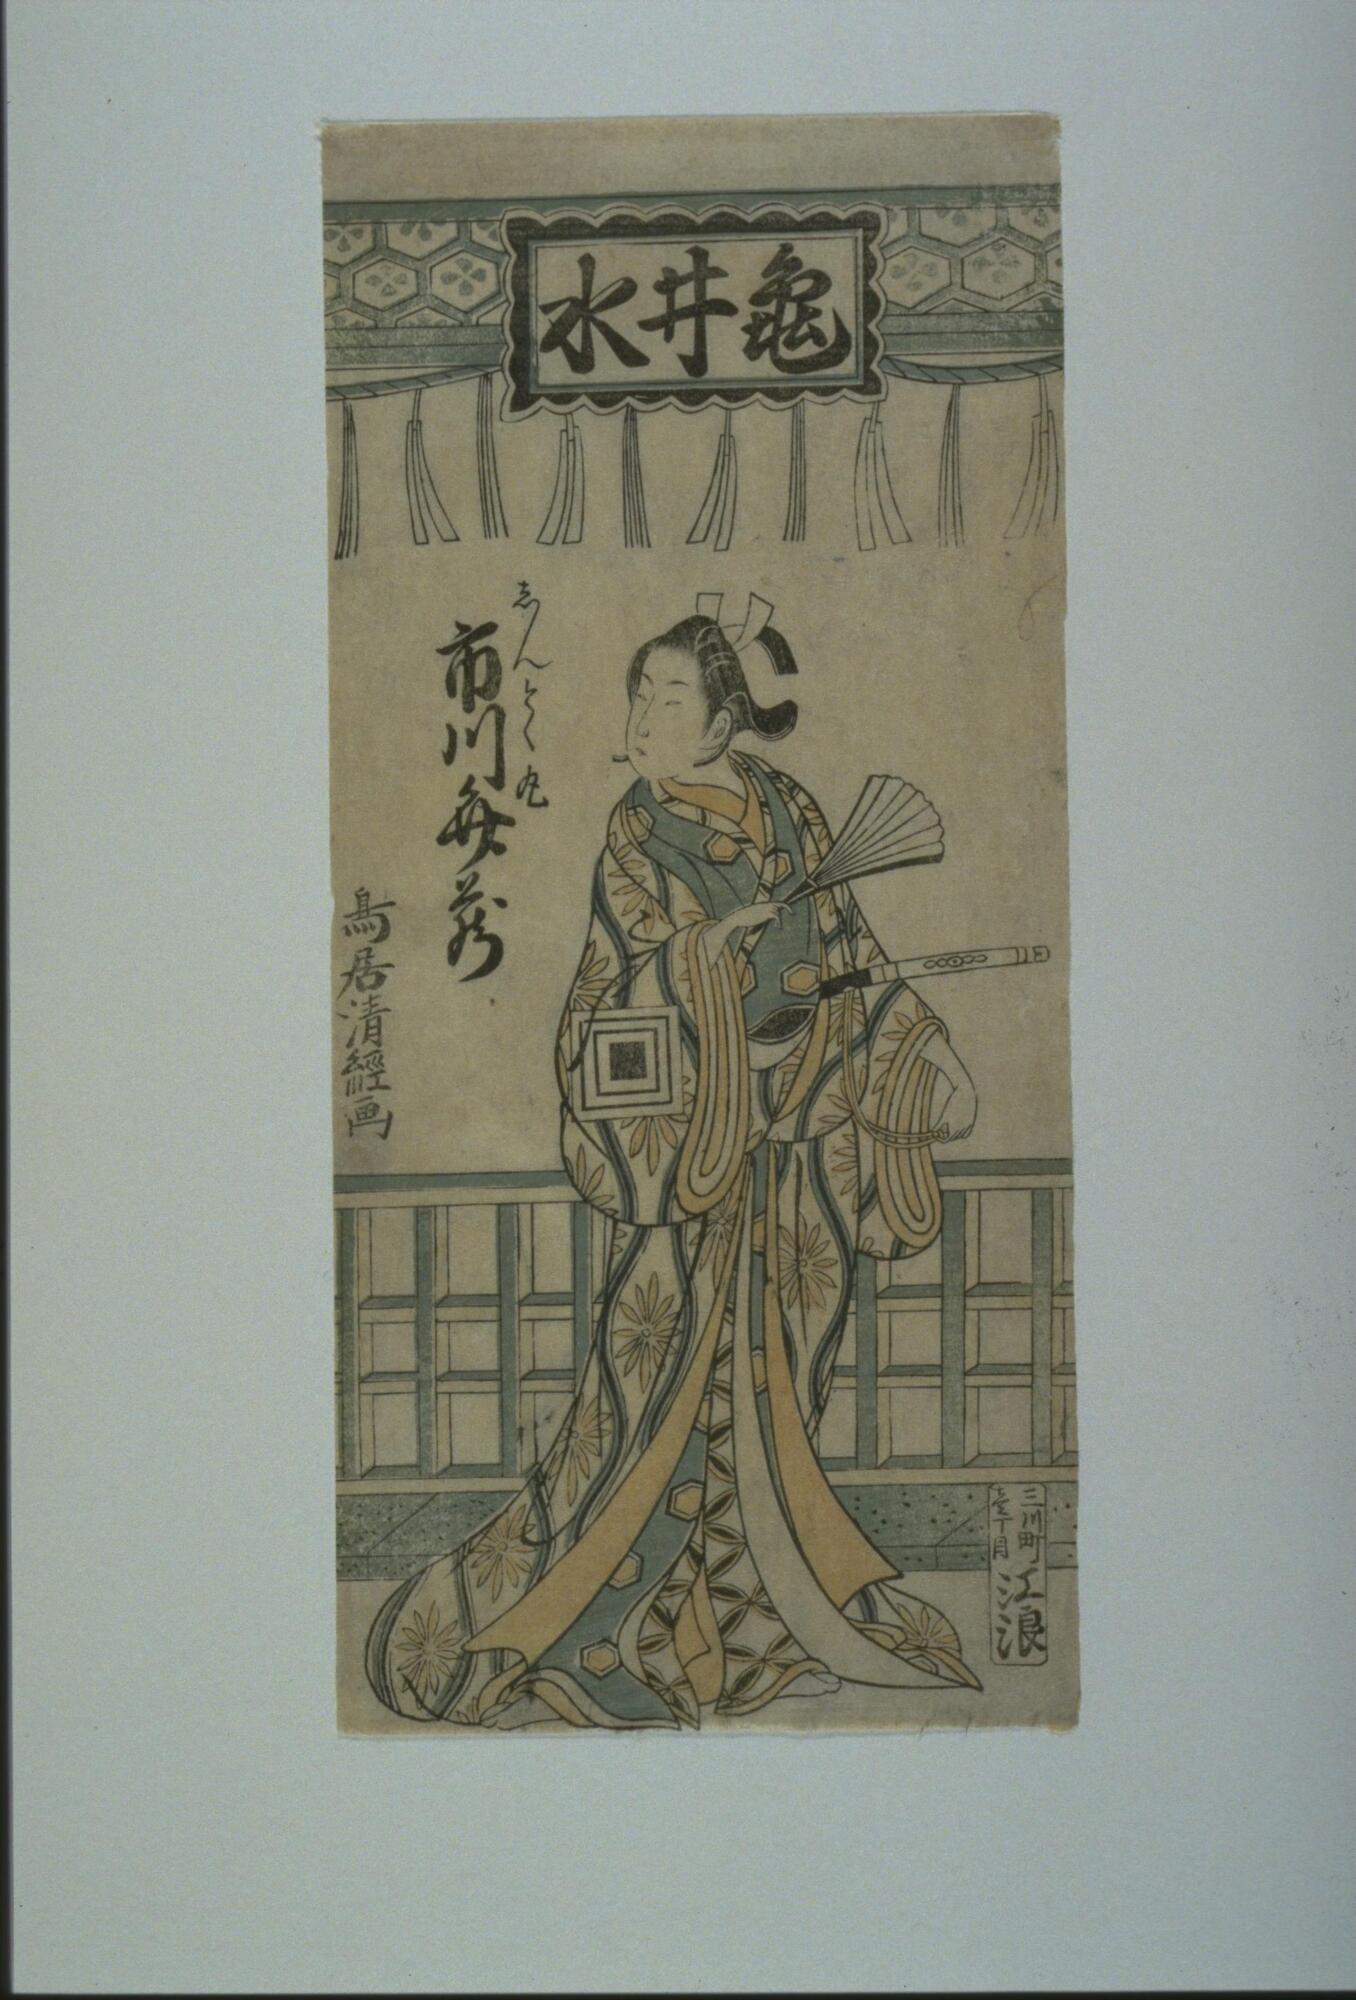 A man dressed as a woman stands under a blue and white fringed drape that reads <em>Kamei no mizu</em>. The man is wearing a orange, blue, and black multi-layered robe with floral bursts on the outer layer. He carries a sword in his belt and holds an open fan in his right hand. His hair is tied back with a white ribbon. He is standing in front of a fence or lattice.<br /><br />
Inscriptions: Ichikawa Benzō, Shintokumaru; Mikawachō [?] chō me, Enami (Publisher's seal); Torii Kiyotsune (Signature)